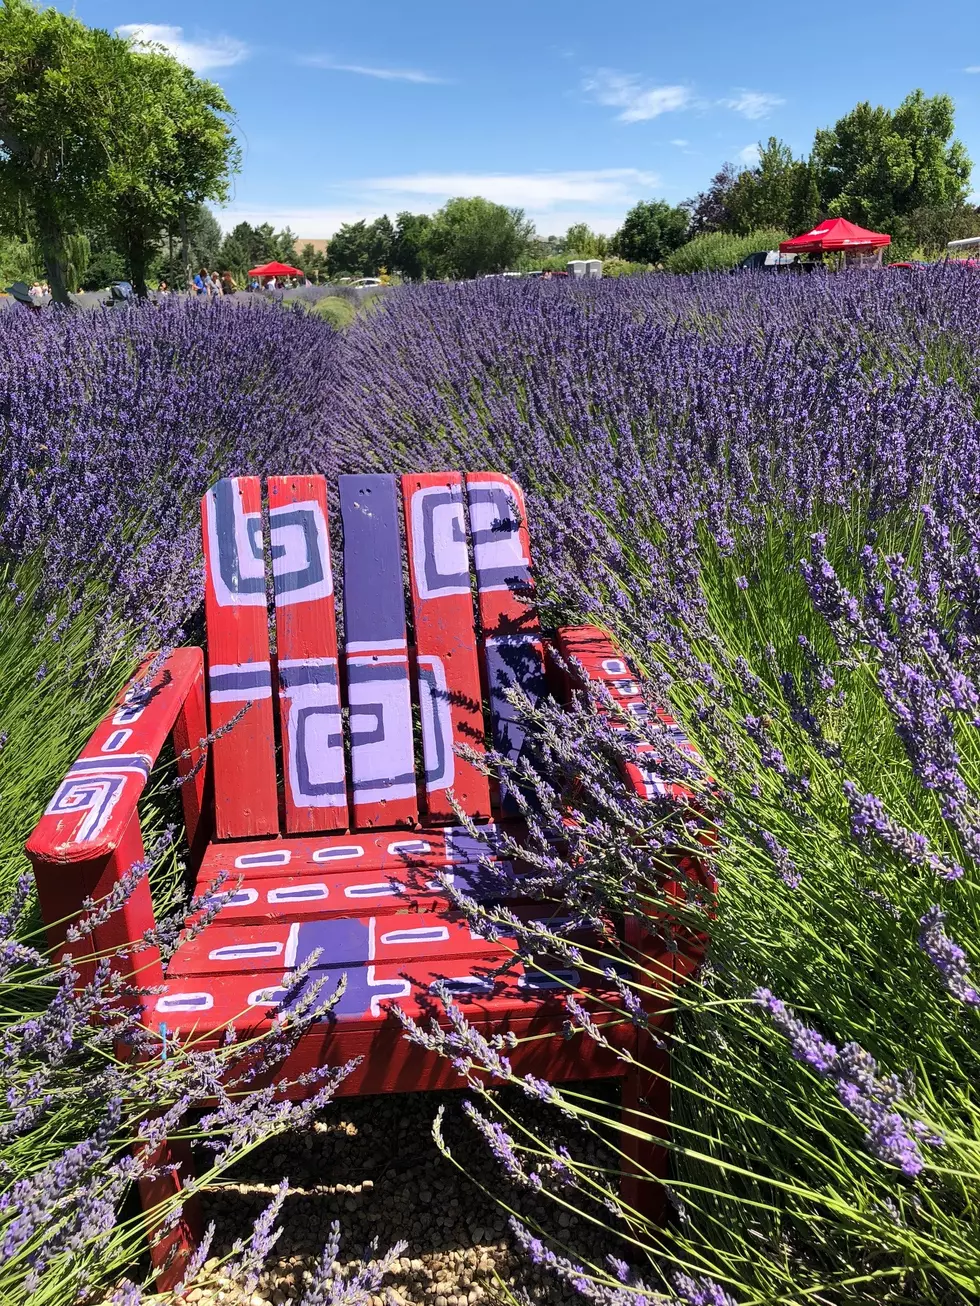 The Lavender Festival: A Treasure Valley Must-Visit